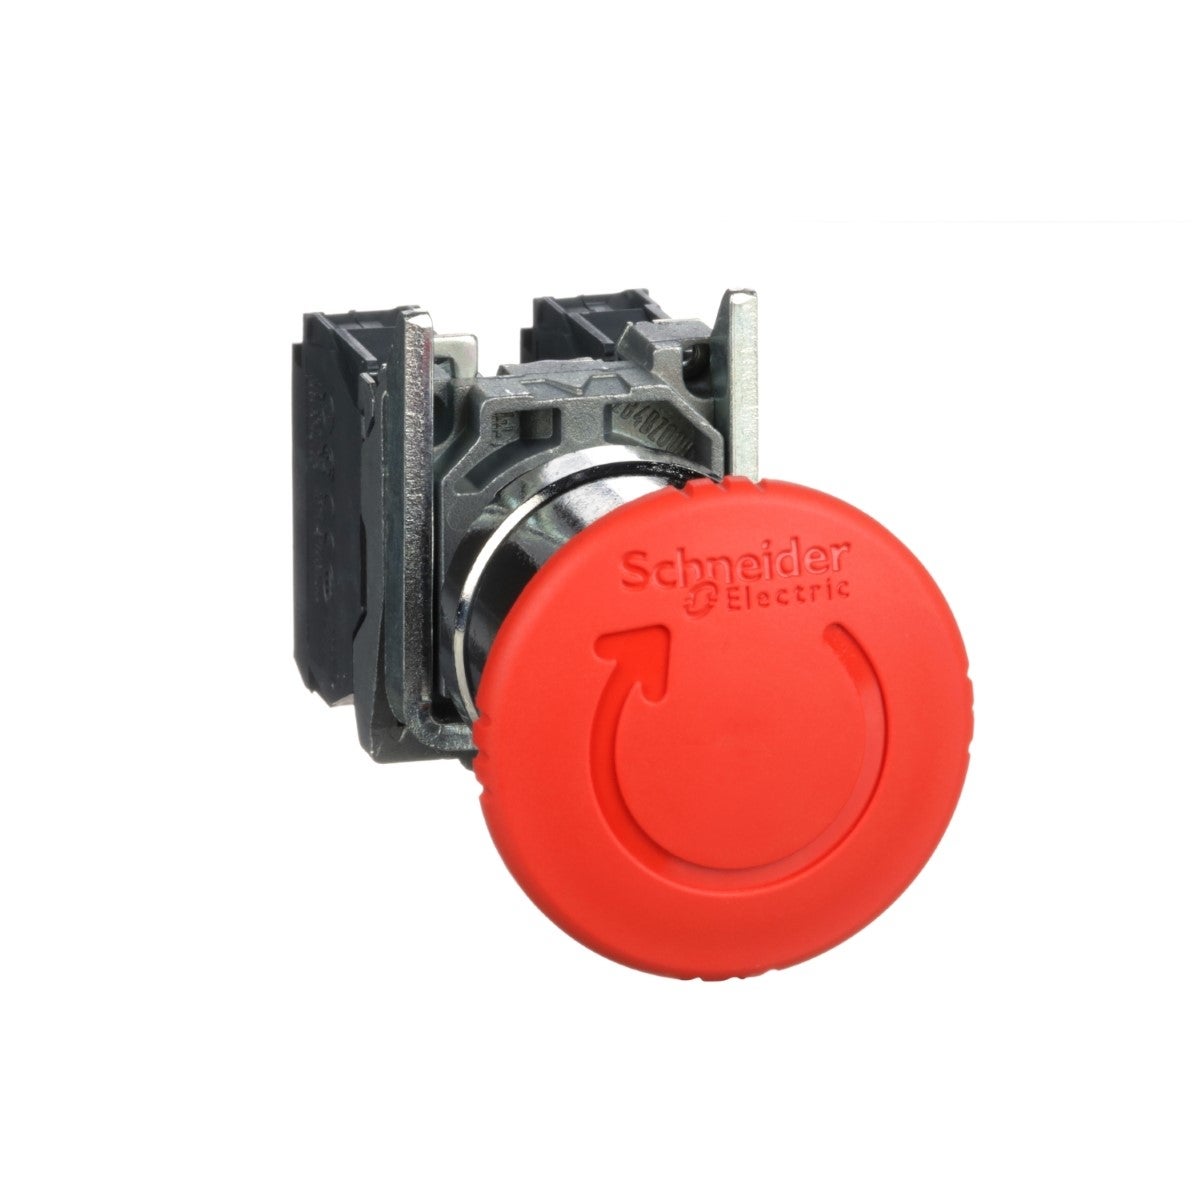 Emergency stop switching off, Harmony XB4, metal, red mushroom, 40mm, 22mm, trigger latching turn to release, 1NO+1NC